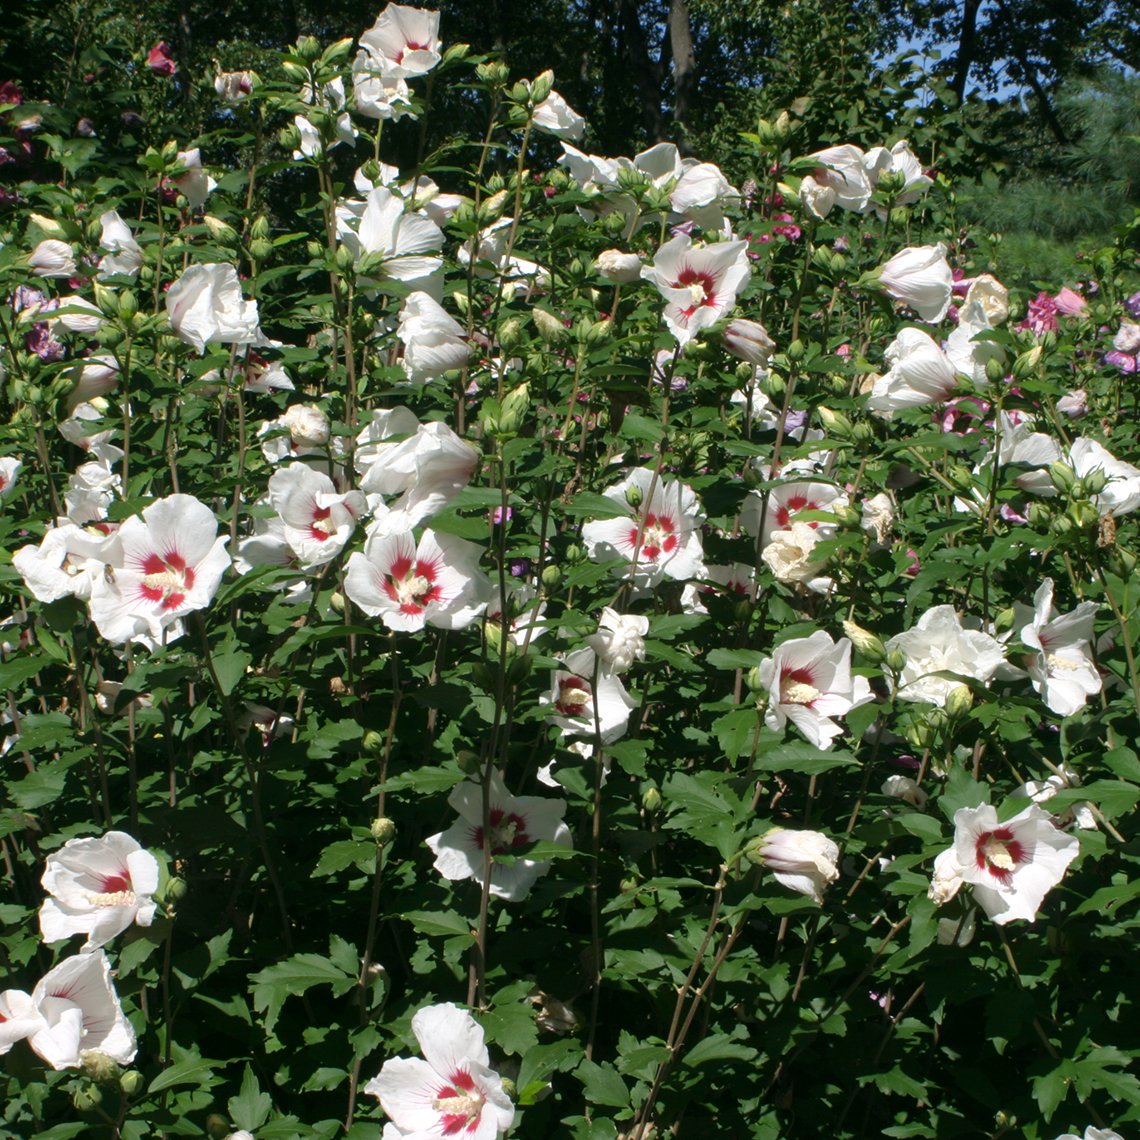 Blush Satin rose of Sharon covered in light pink or white blooms with noticeable red centers